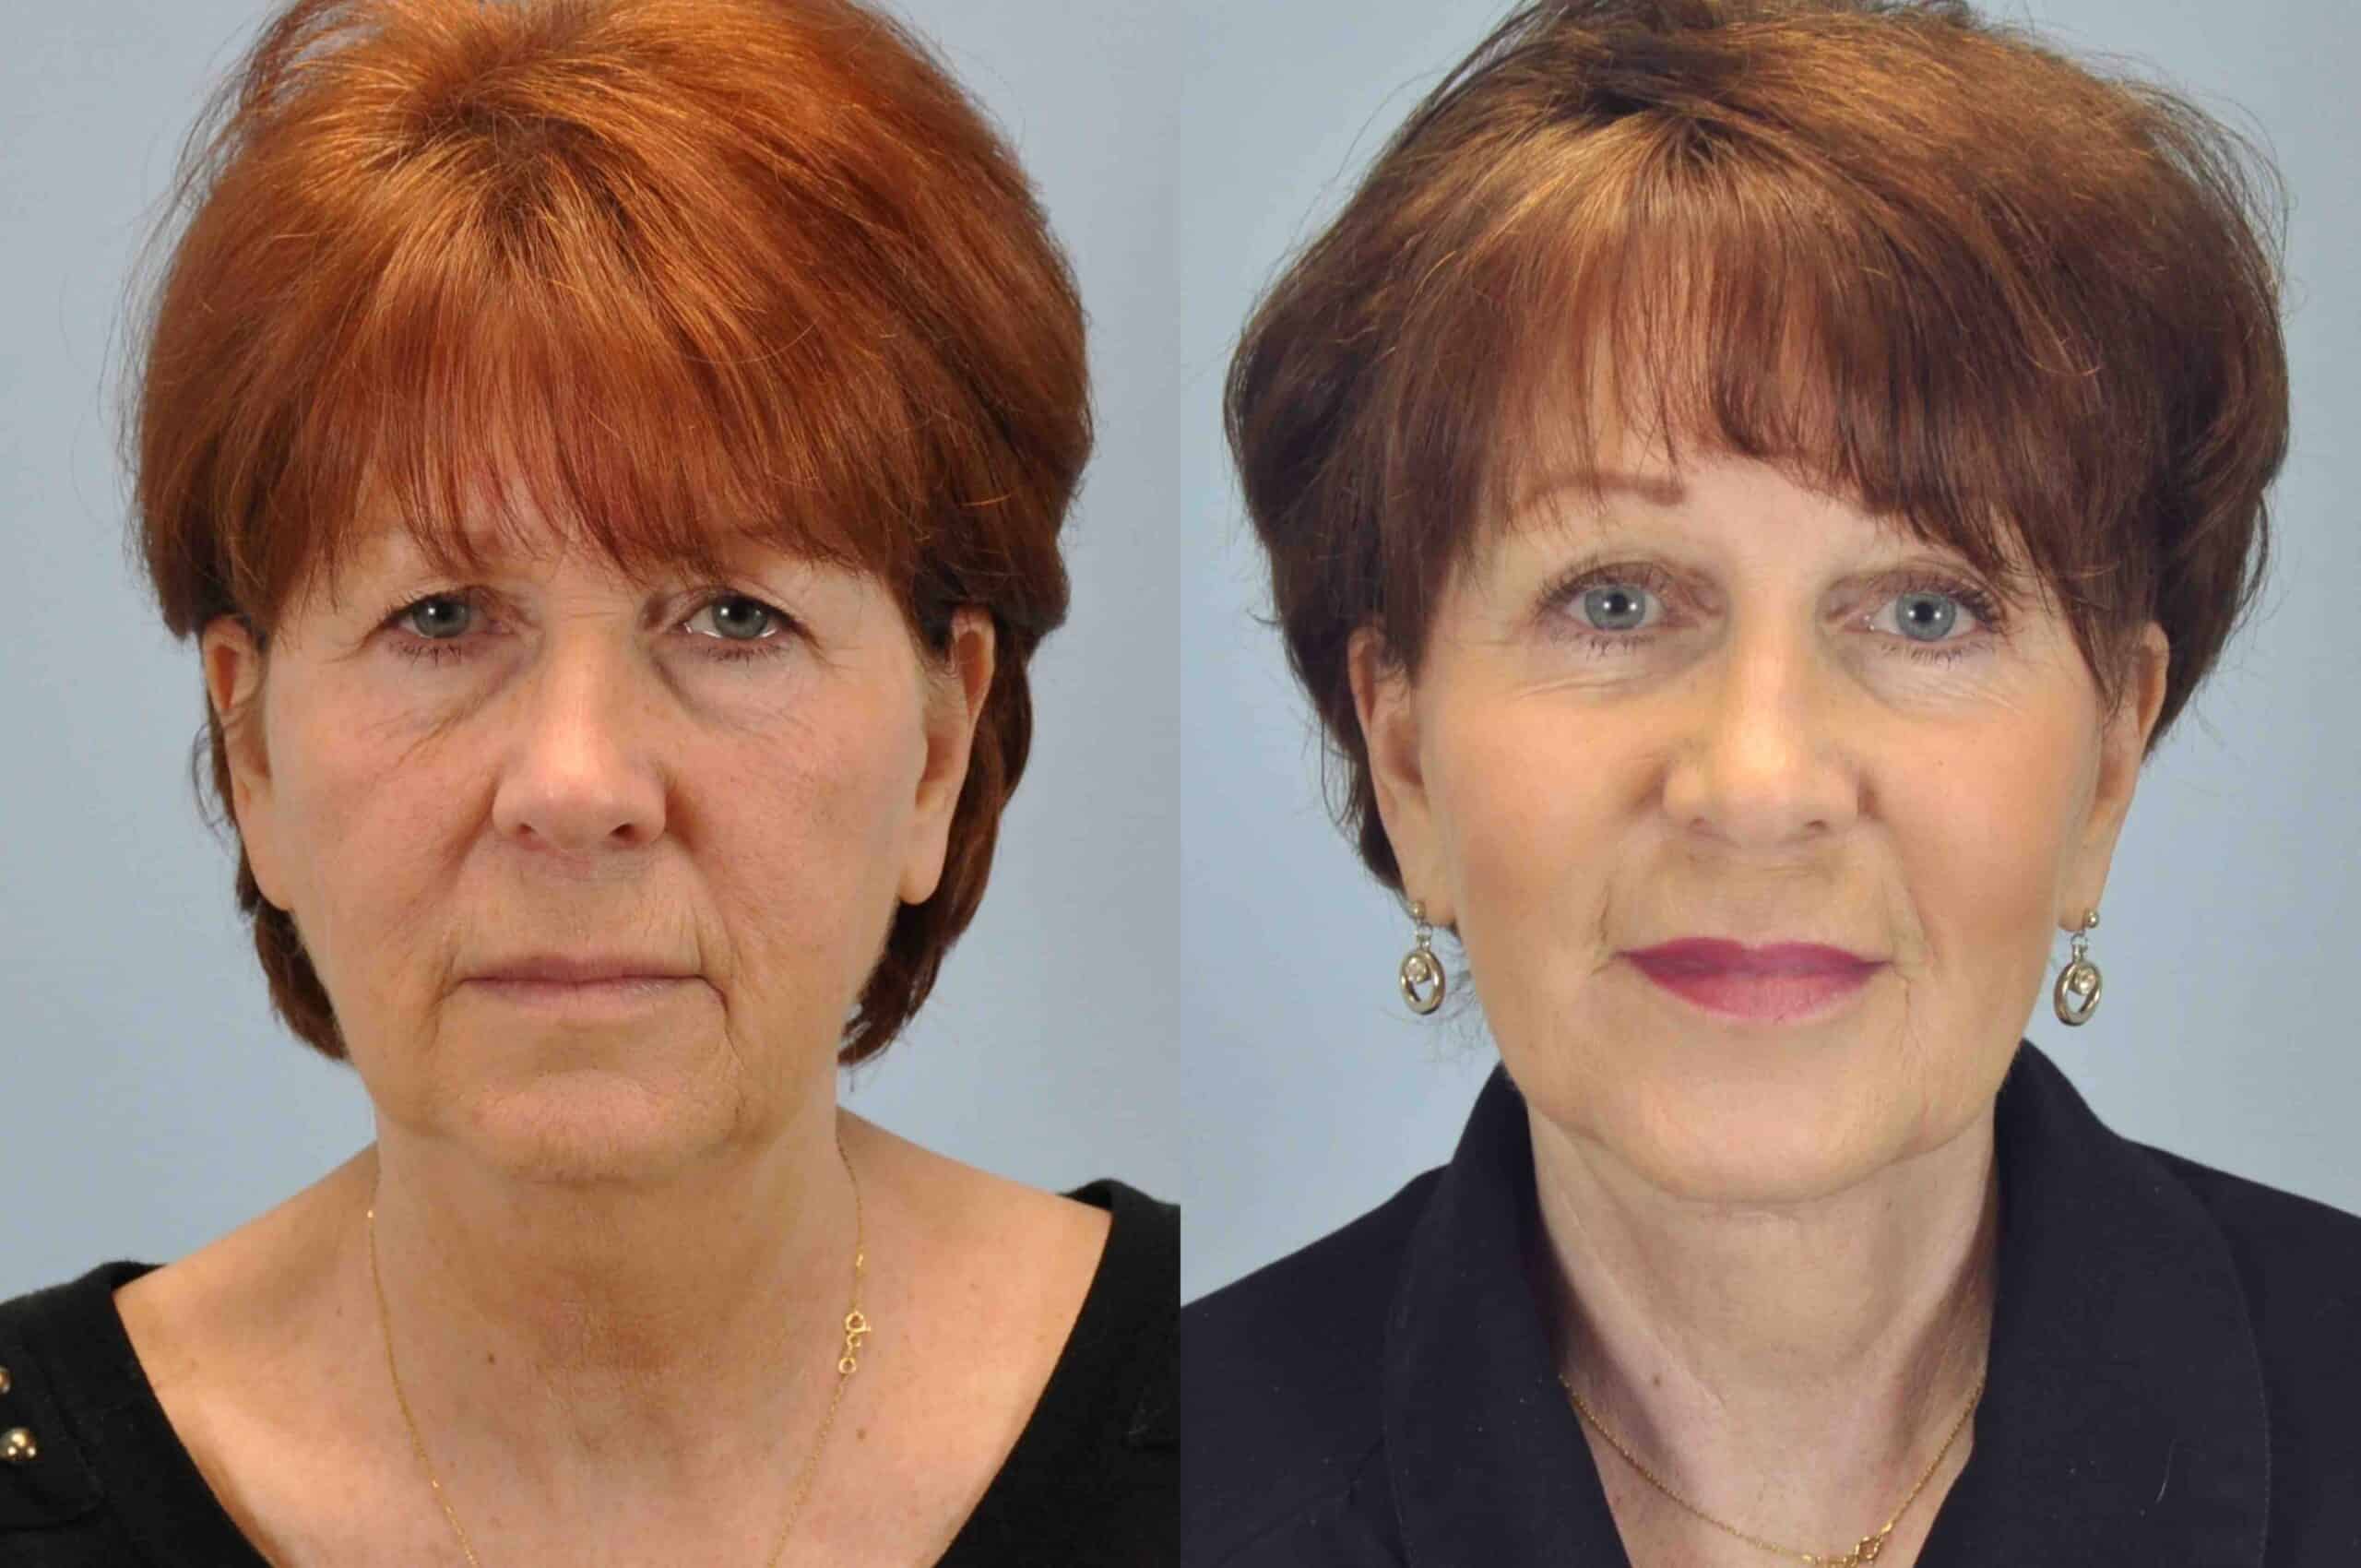 Before and after, patient 1 yr post op from Autologous Fat Transfer Face, Lip Augmentation, Facelift, Necklift, Endo Brow, Lower Blepharoplasty/ Canthopexy procedures performed by Dr. Paul Vanek